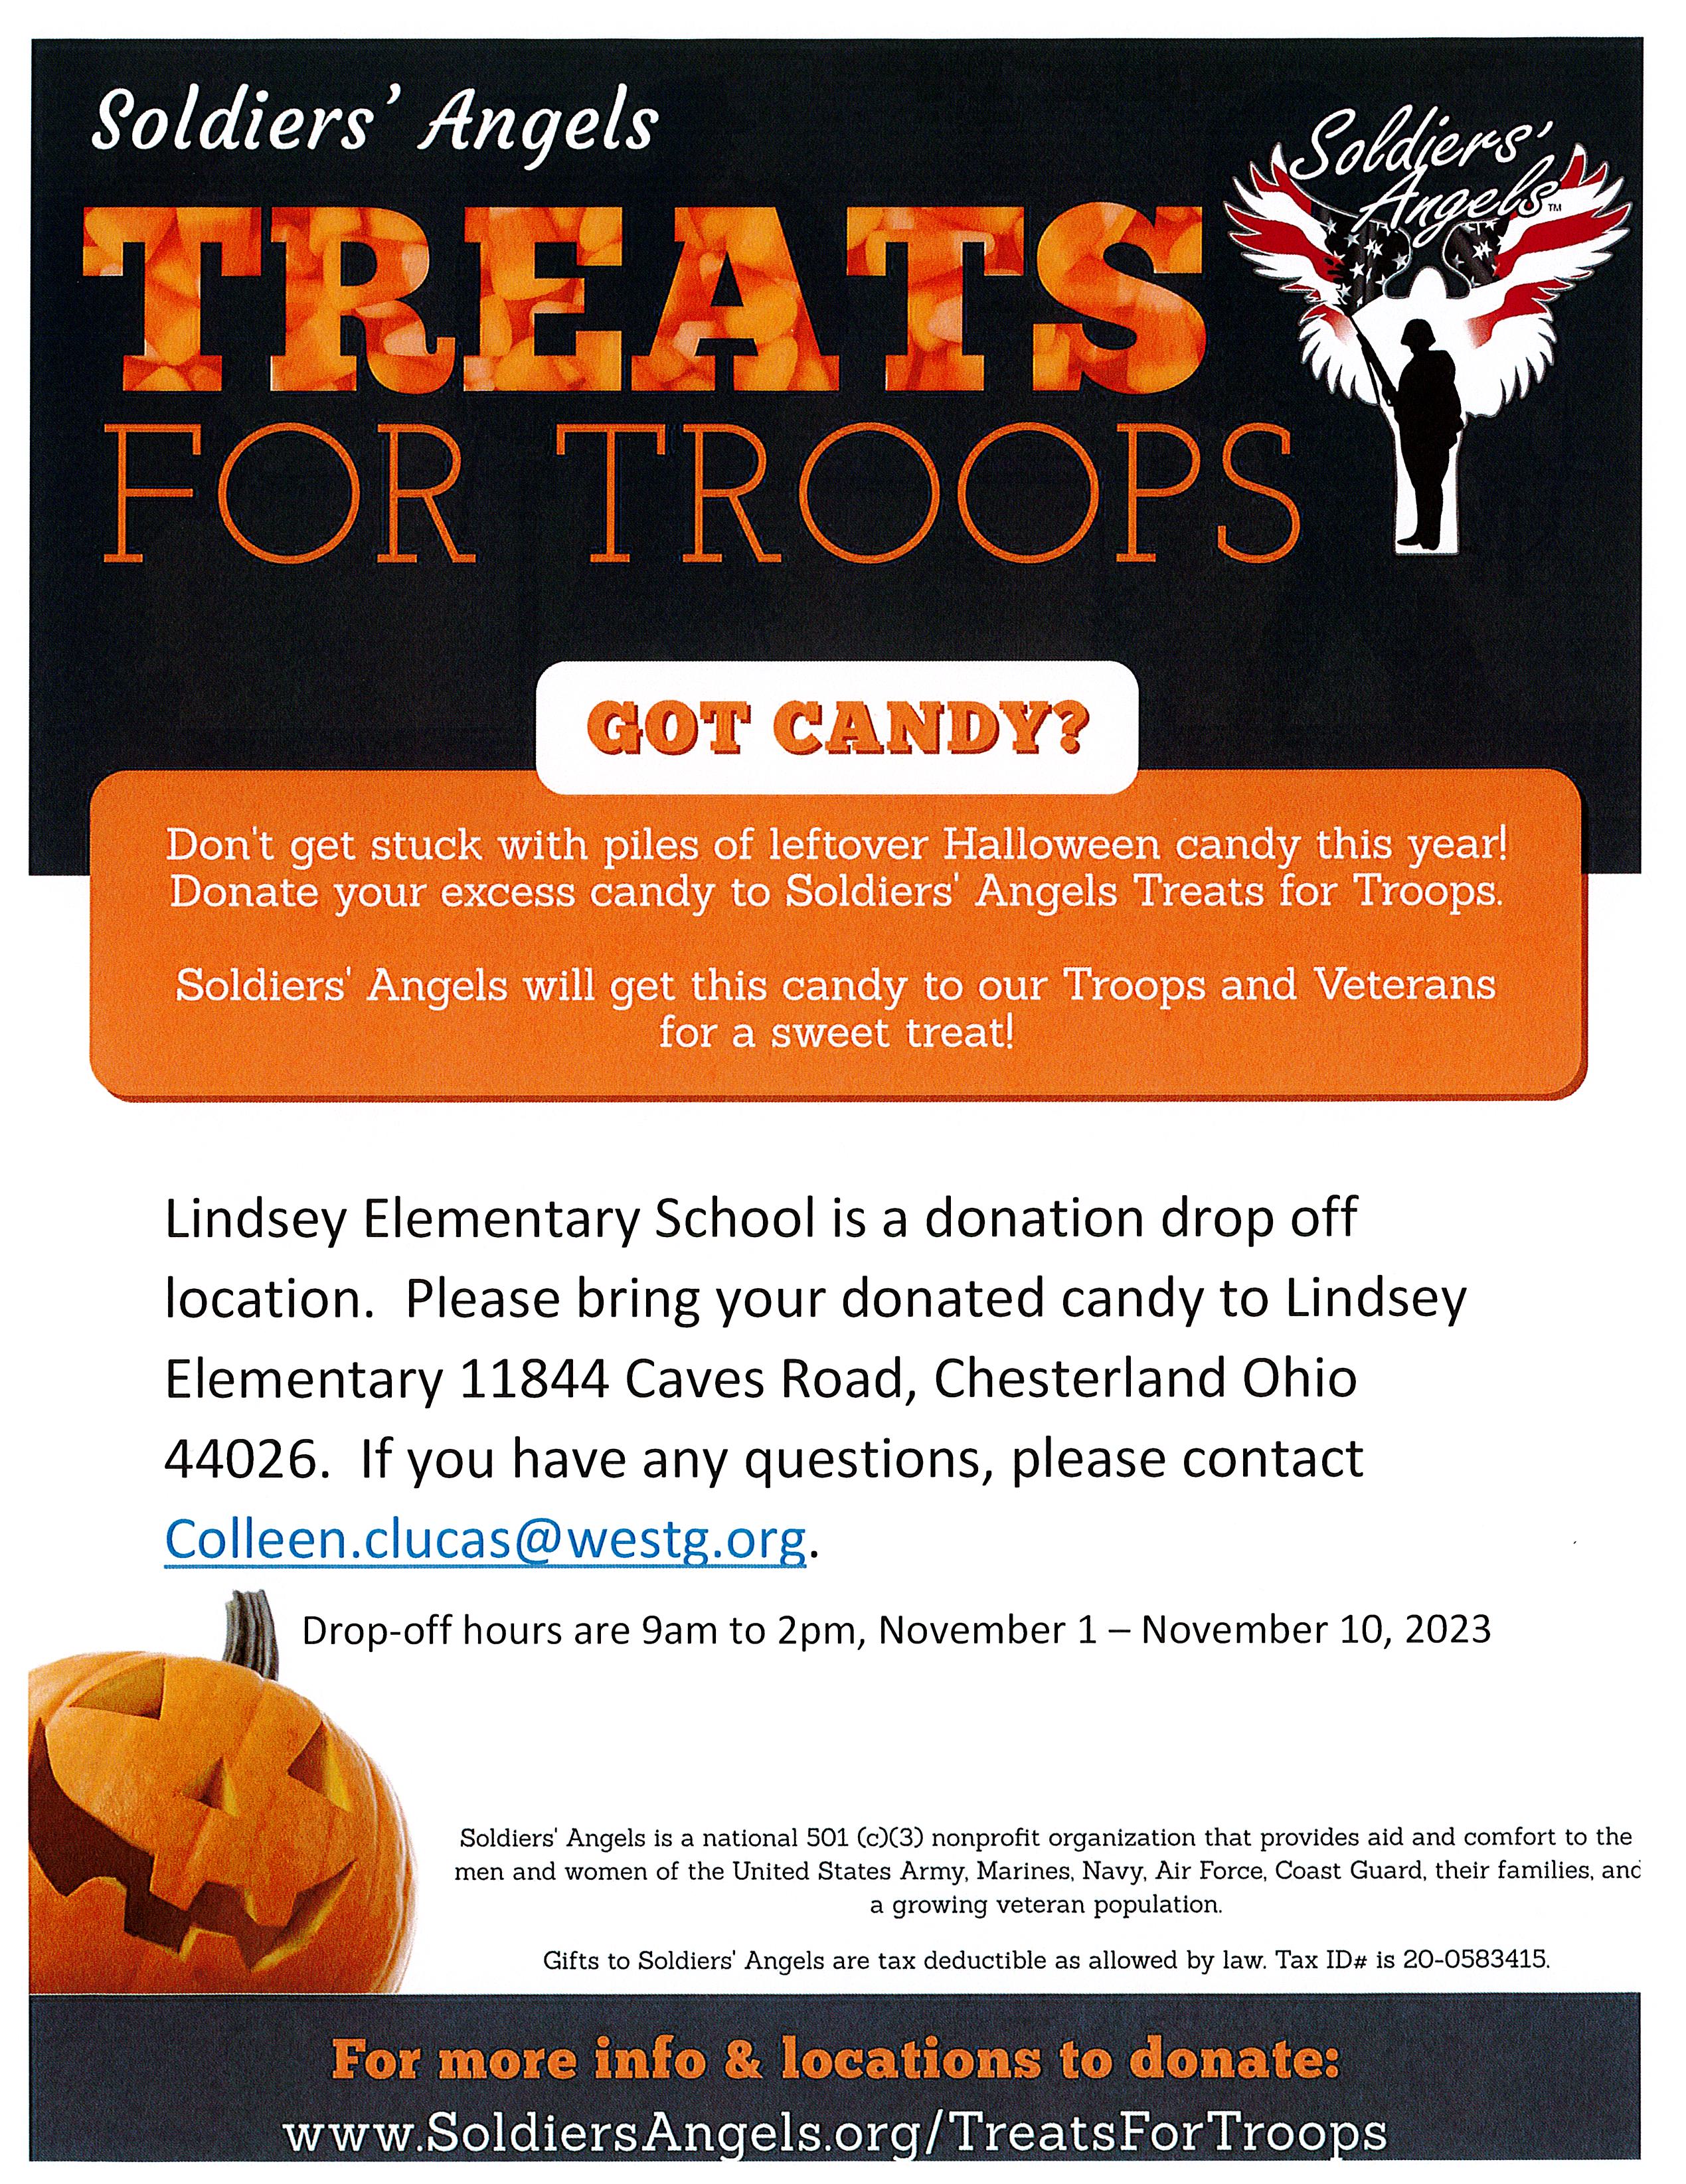 Candy for troops